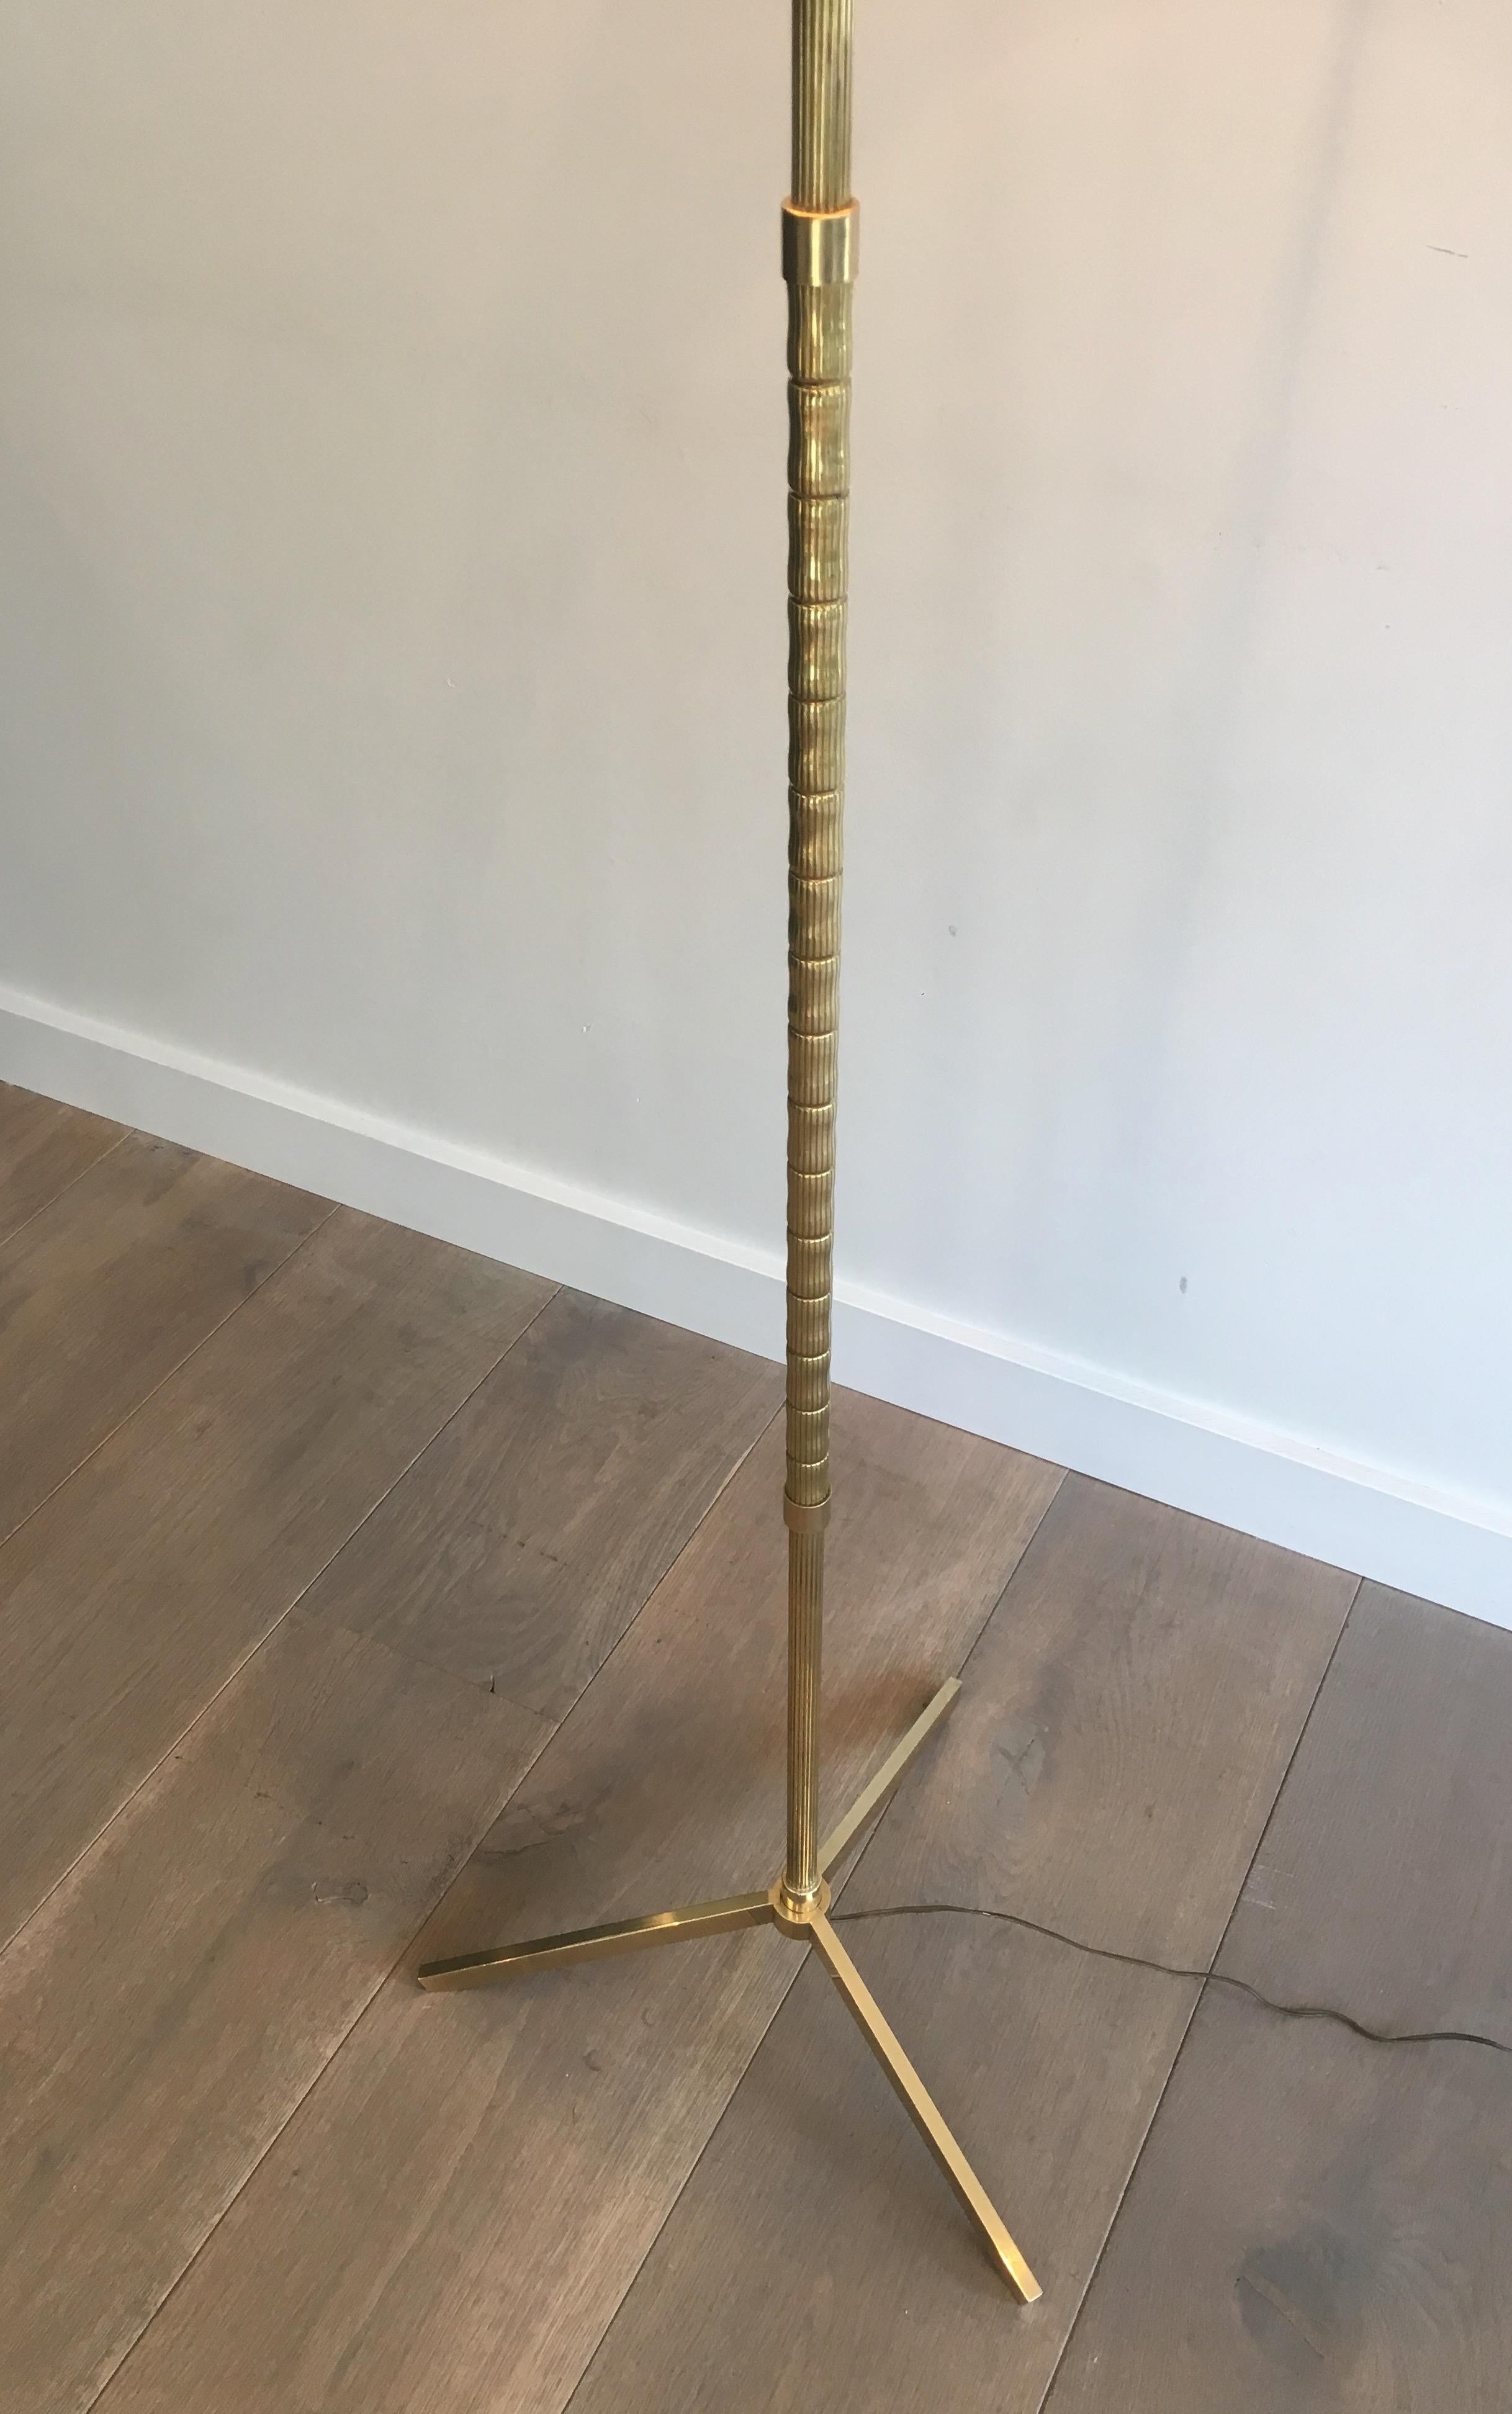 Late 20th Century Neoclassical Style Faux-Bamboo Brass Floor Lamp, French, circa 1970